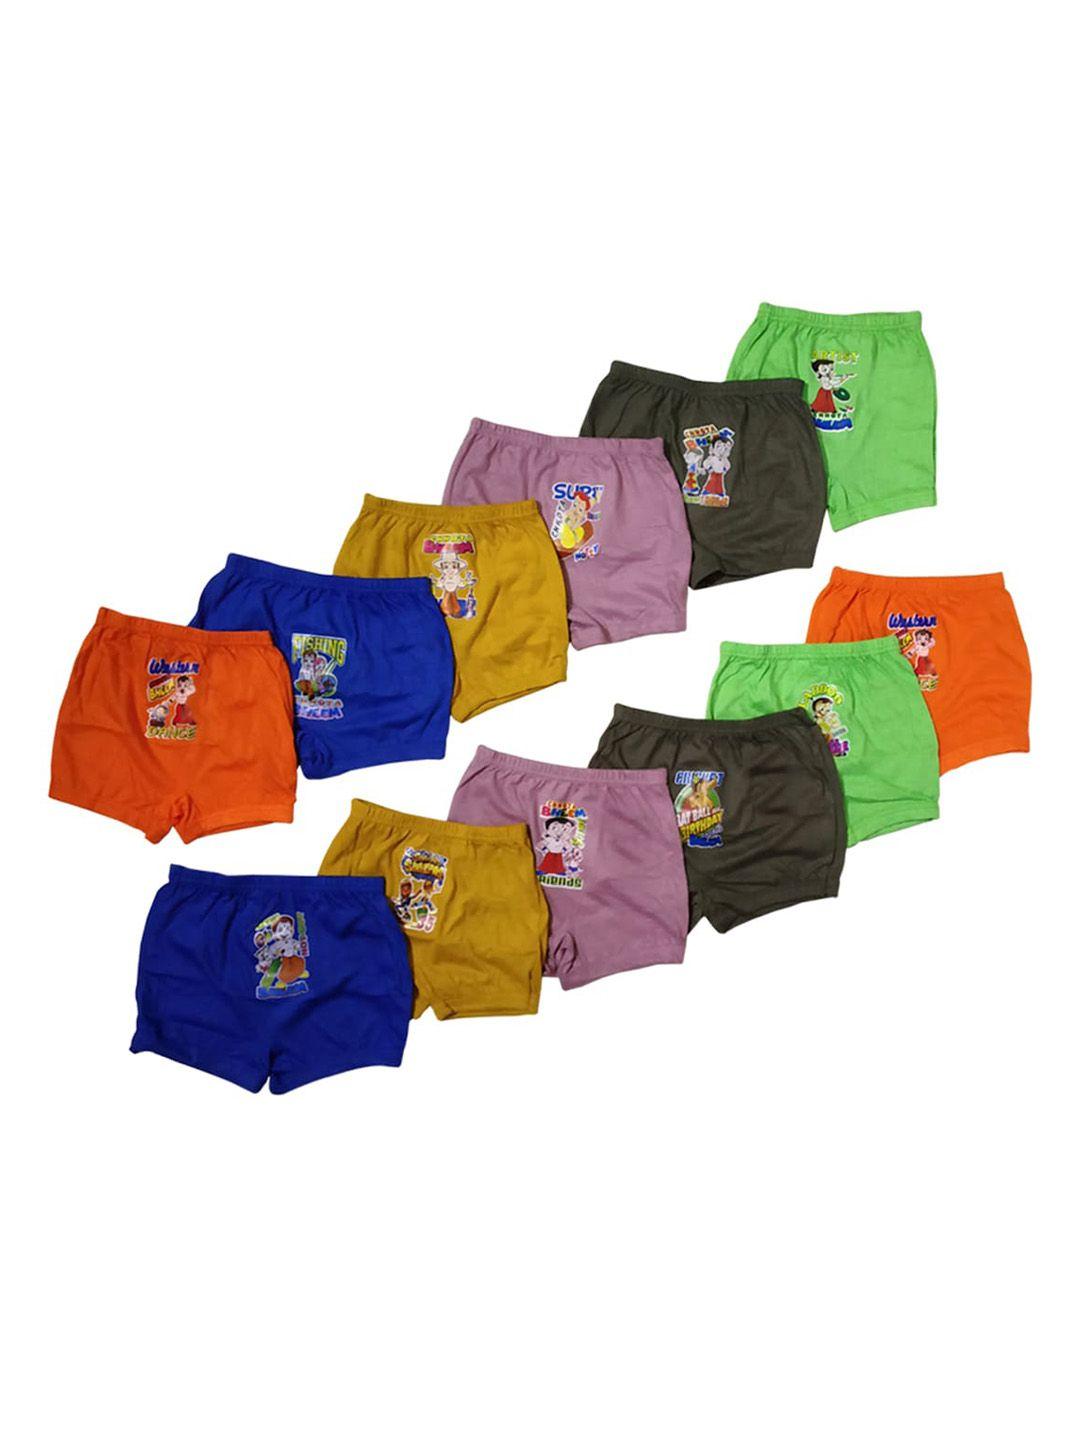 baesd infants pack of 12 printed cotton bloomer briefs 32_dra_po-12